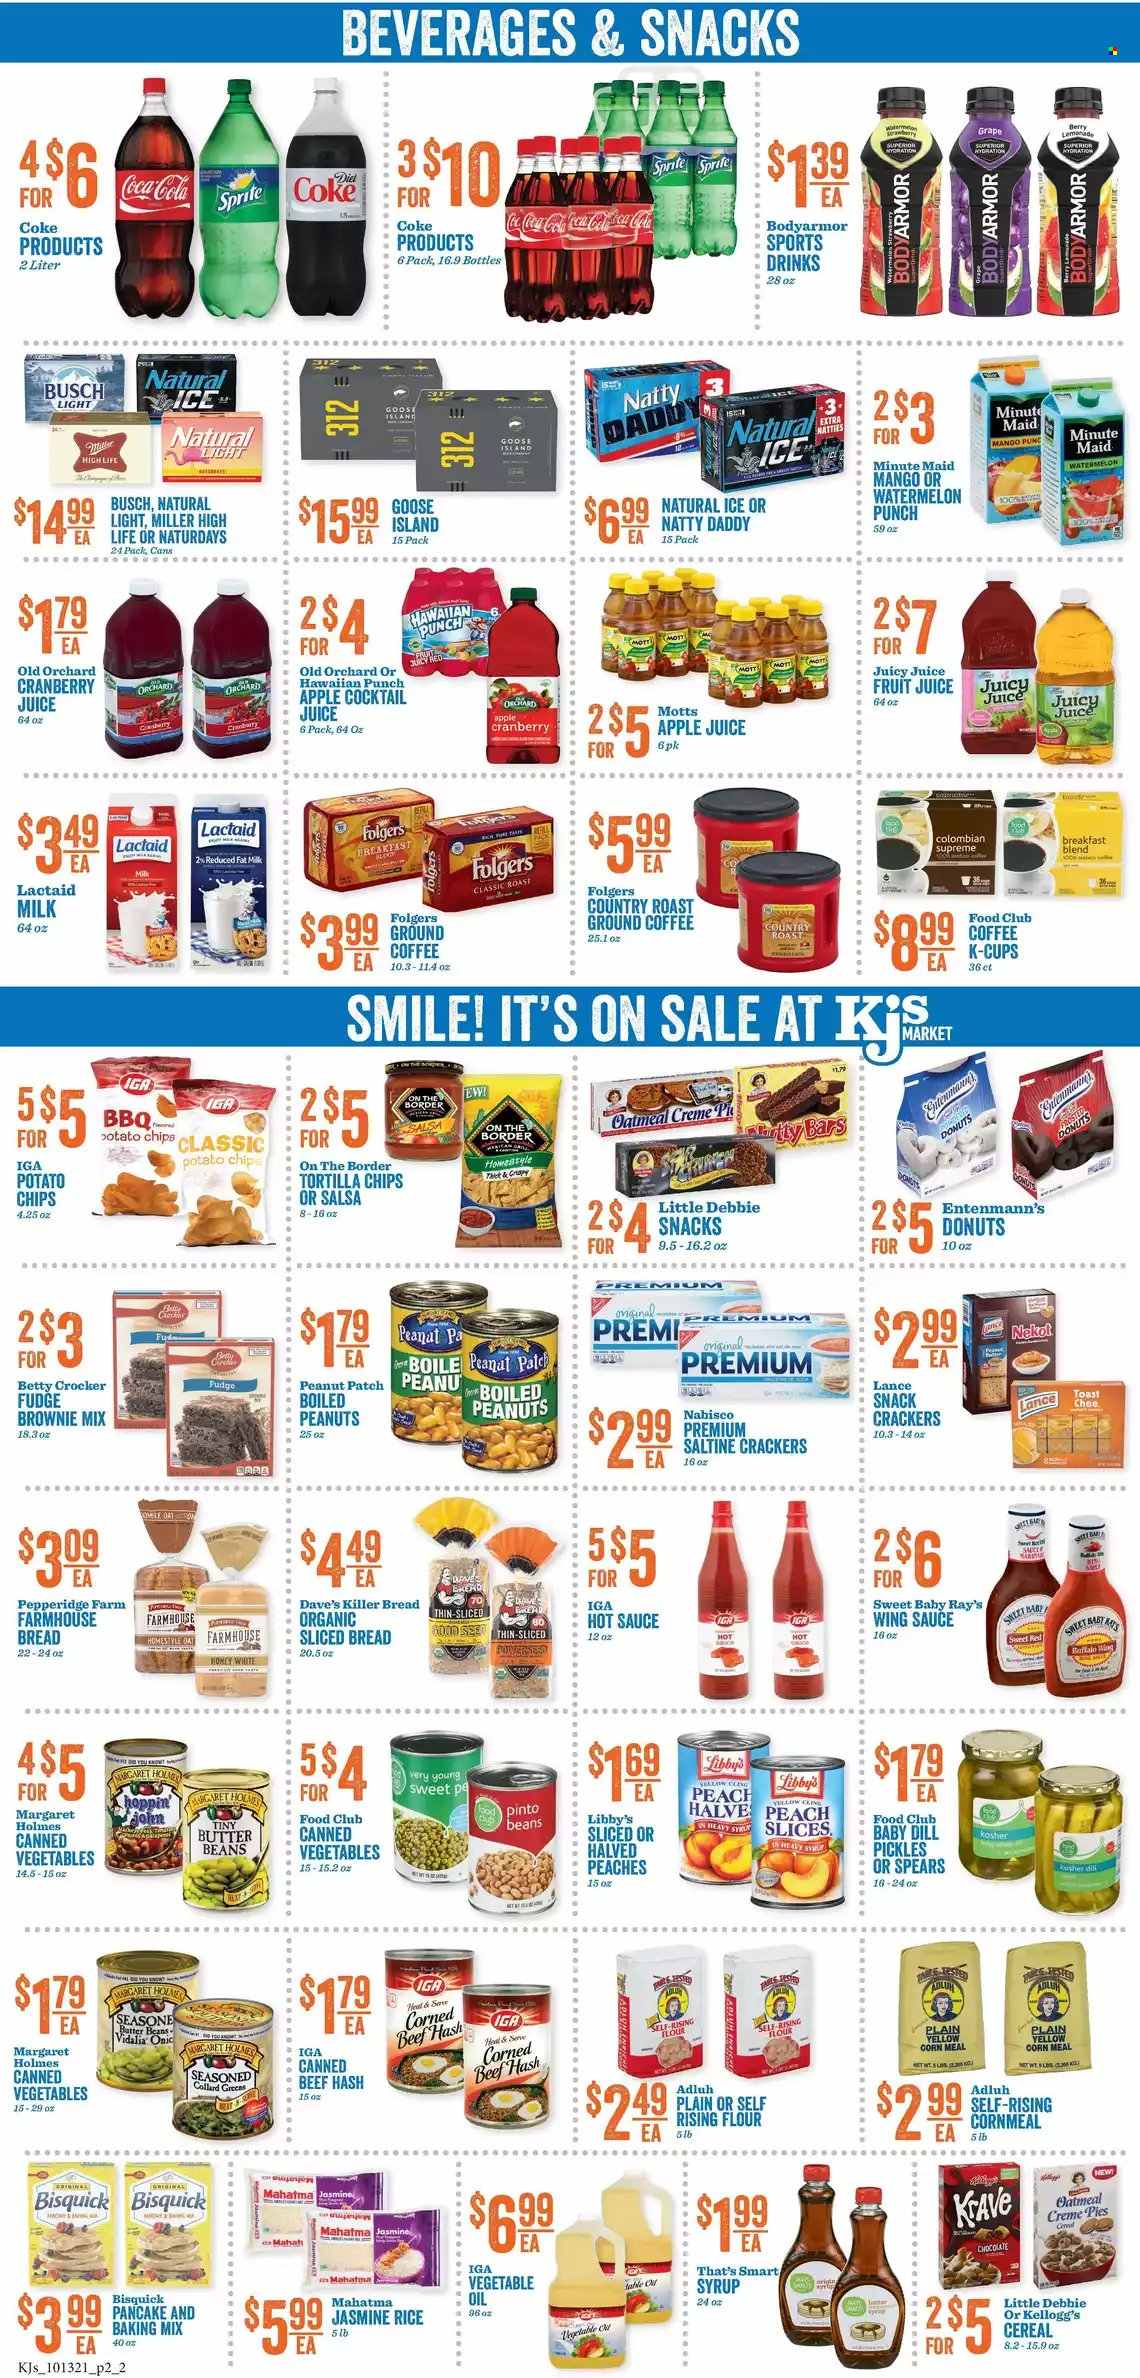 thumbnail - KJ´s Market Flyer - 10/13/2021 - 10/19/2021 - Sales products - bread, donut, Entenmann's, brownie mix, corn, watermelon, Mott's, beef hash, sauce, corned beef, Lactaid, milk, butter, fudge, snack, crackers, Kellogg's, tortilla chips, potato chips, chips, Bisquick, self rising flour, oatmeal, oats, pickles, pinto beans, canned vegetables, cereals, rice, jasmine rice, dill, hot sauce, salsa, wing sauce, vegetable oil, oil, syrup, peanuts, apple juice, Coca-Cola, cranberry juice, Sprite, juice, fruit juice, fruit punch, coffee, Folgers, ground coffee, coffee capsules, K-Cups, breakfast blend, Busch, Miller, beef meat, peaches. Page 1.